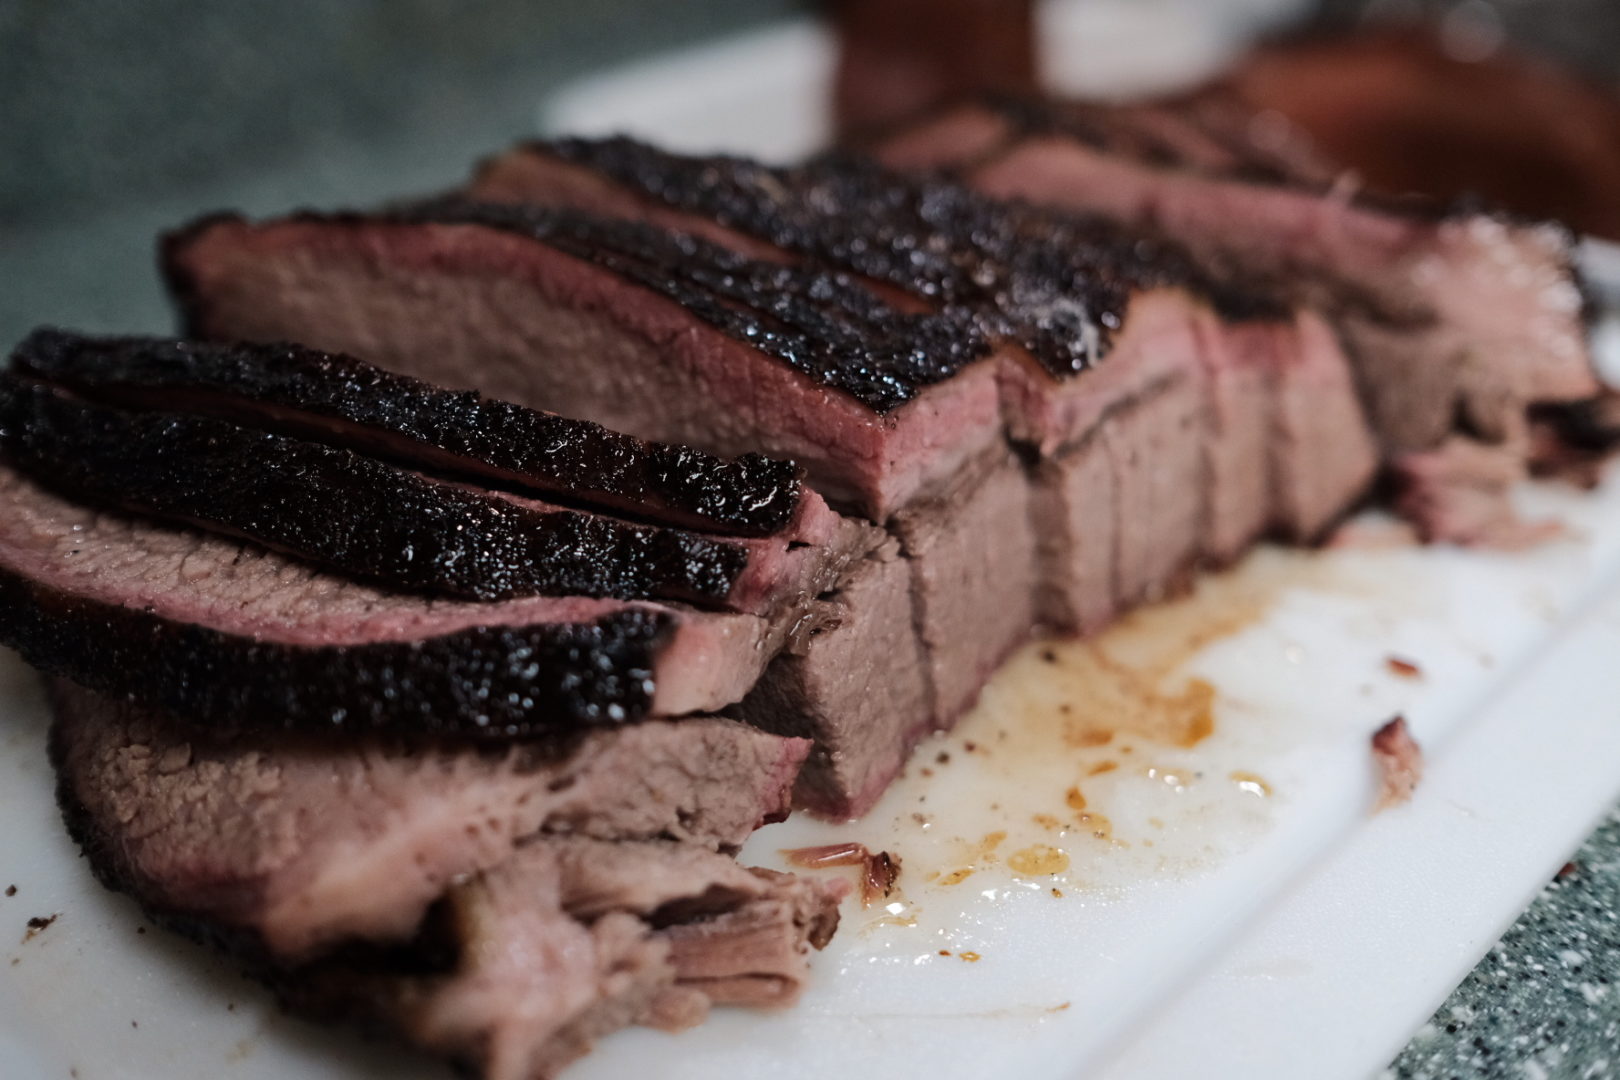 Sliced brisket. It looks way better than this Alt Text sounds